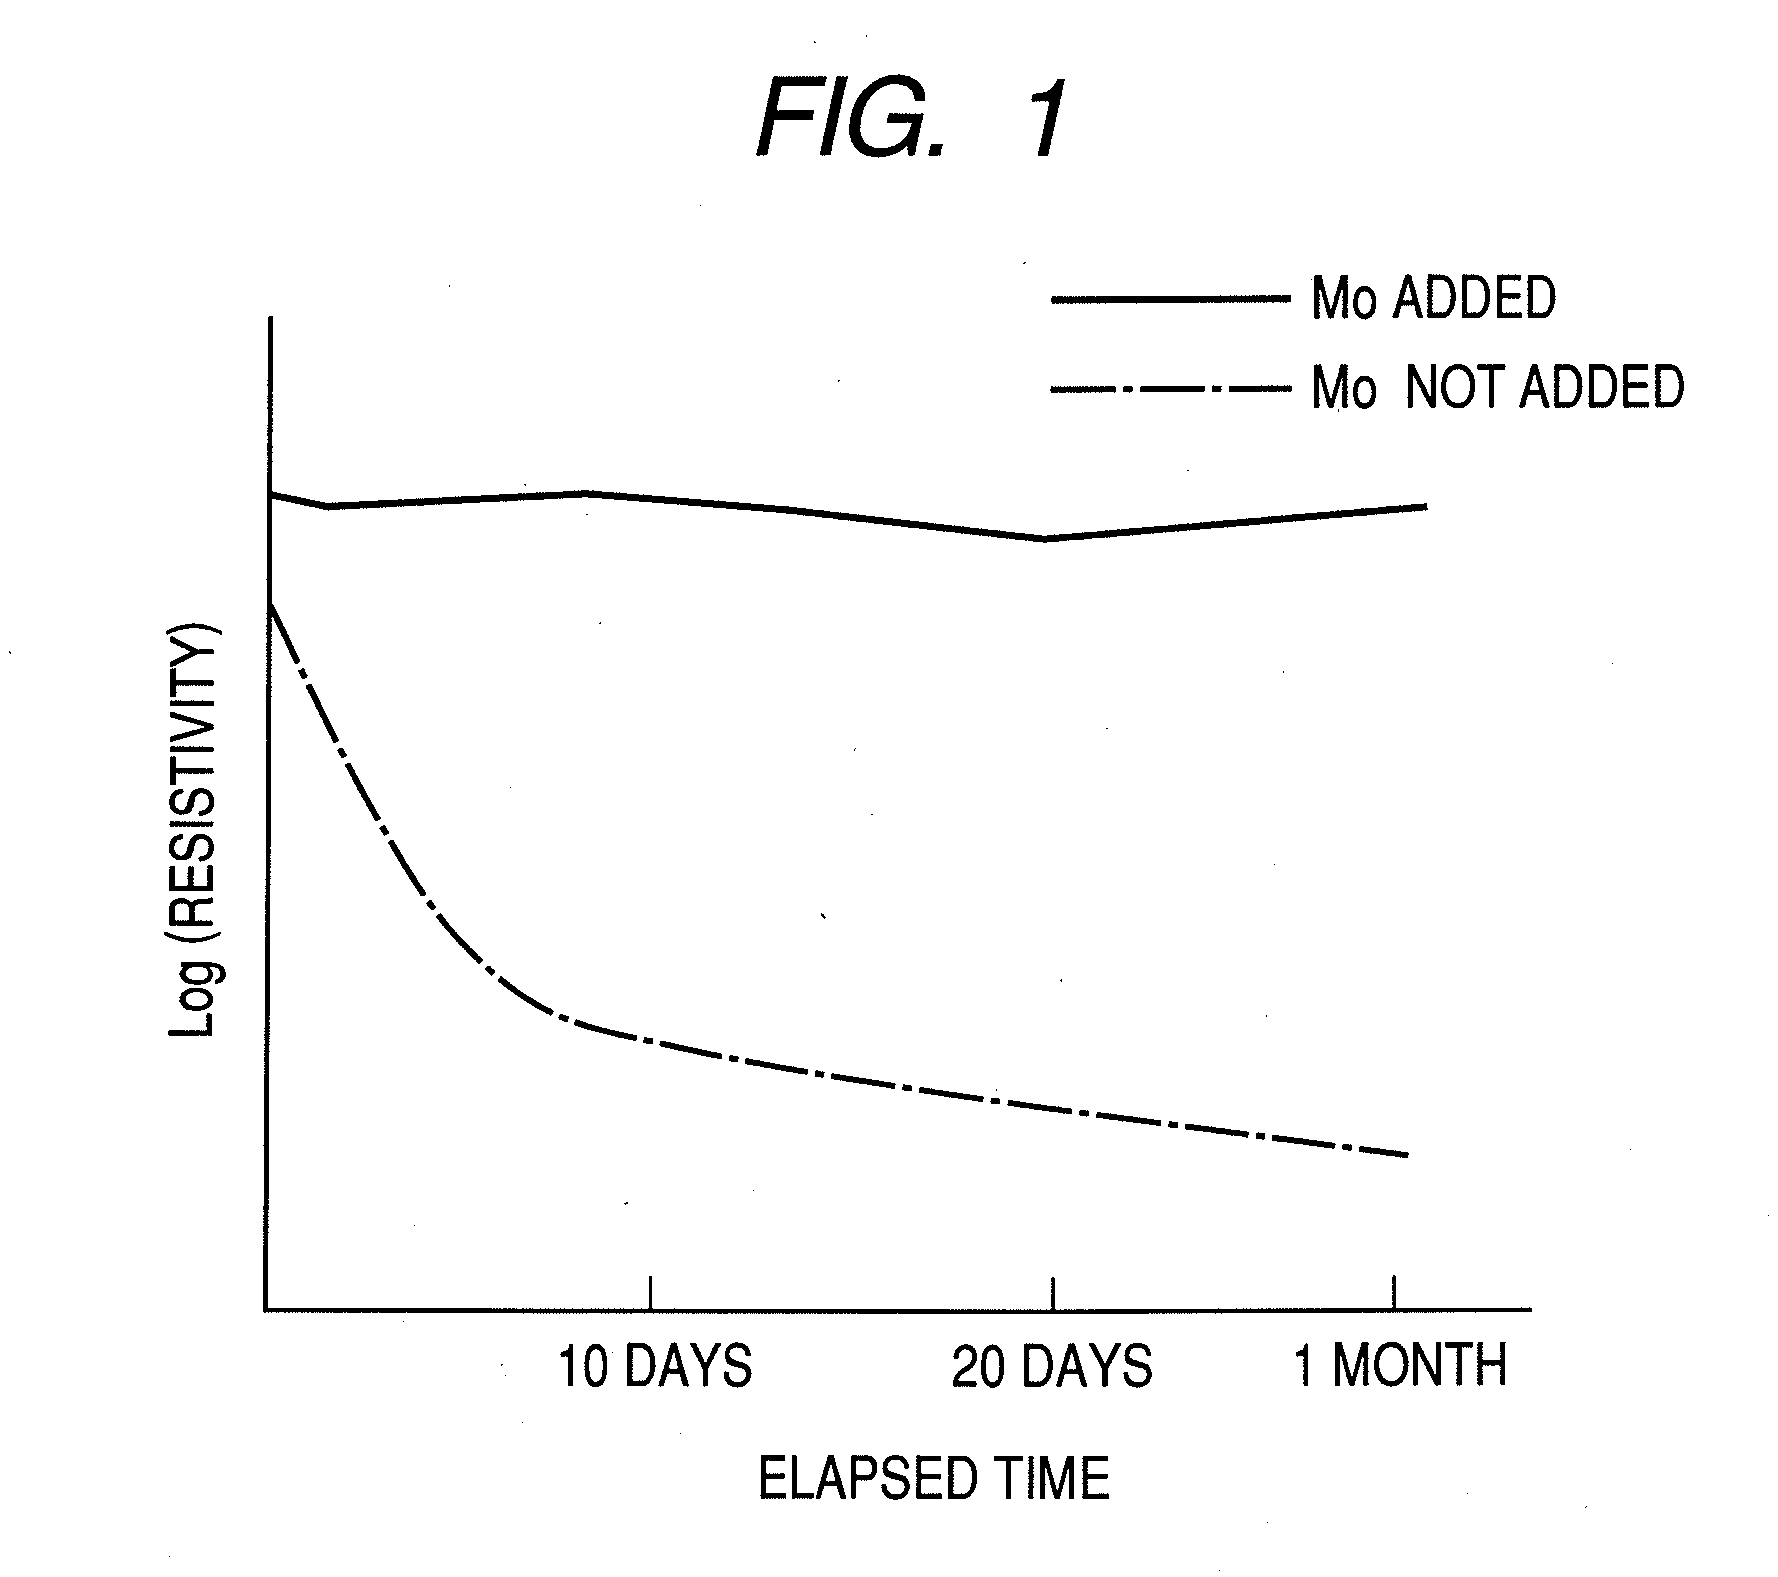 Amorphous oxide and field effect transistor